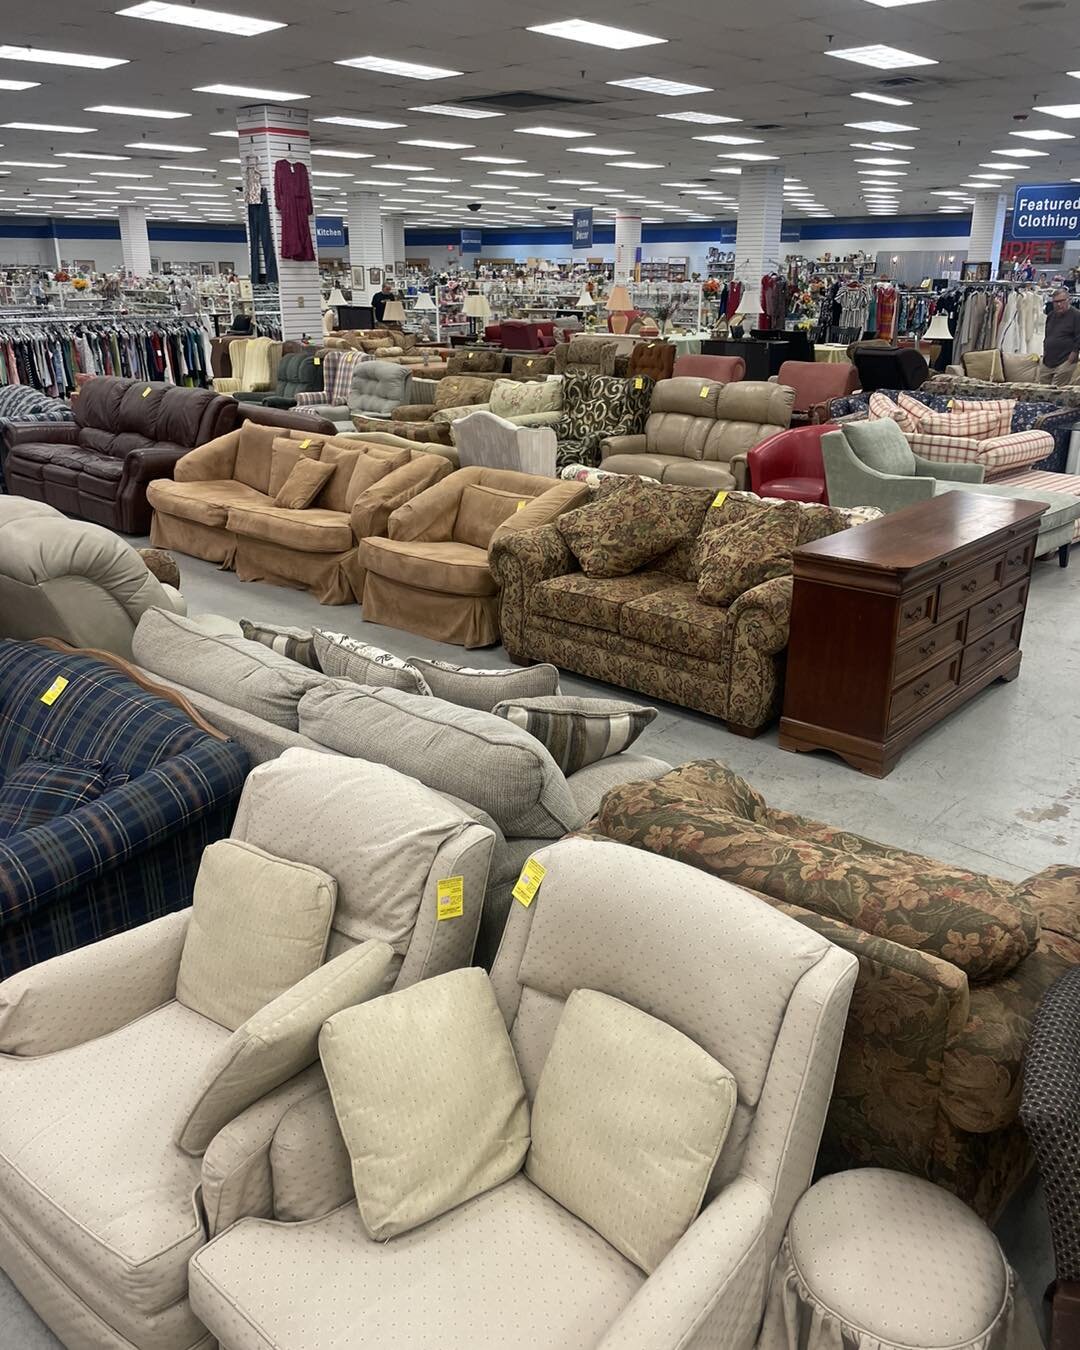 2-Day 50% off Furniture Sale at Feasterville ONLY!

Saturday (7/1) - Monday (7/3)

*Cannot be combined with other offers or discounts. Feasterville store only. 

.
.
.
When you purchase, donate, or volunteer with any of our 7 thrift locations, you ar